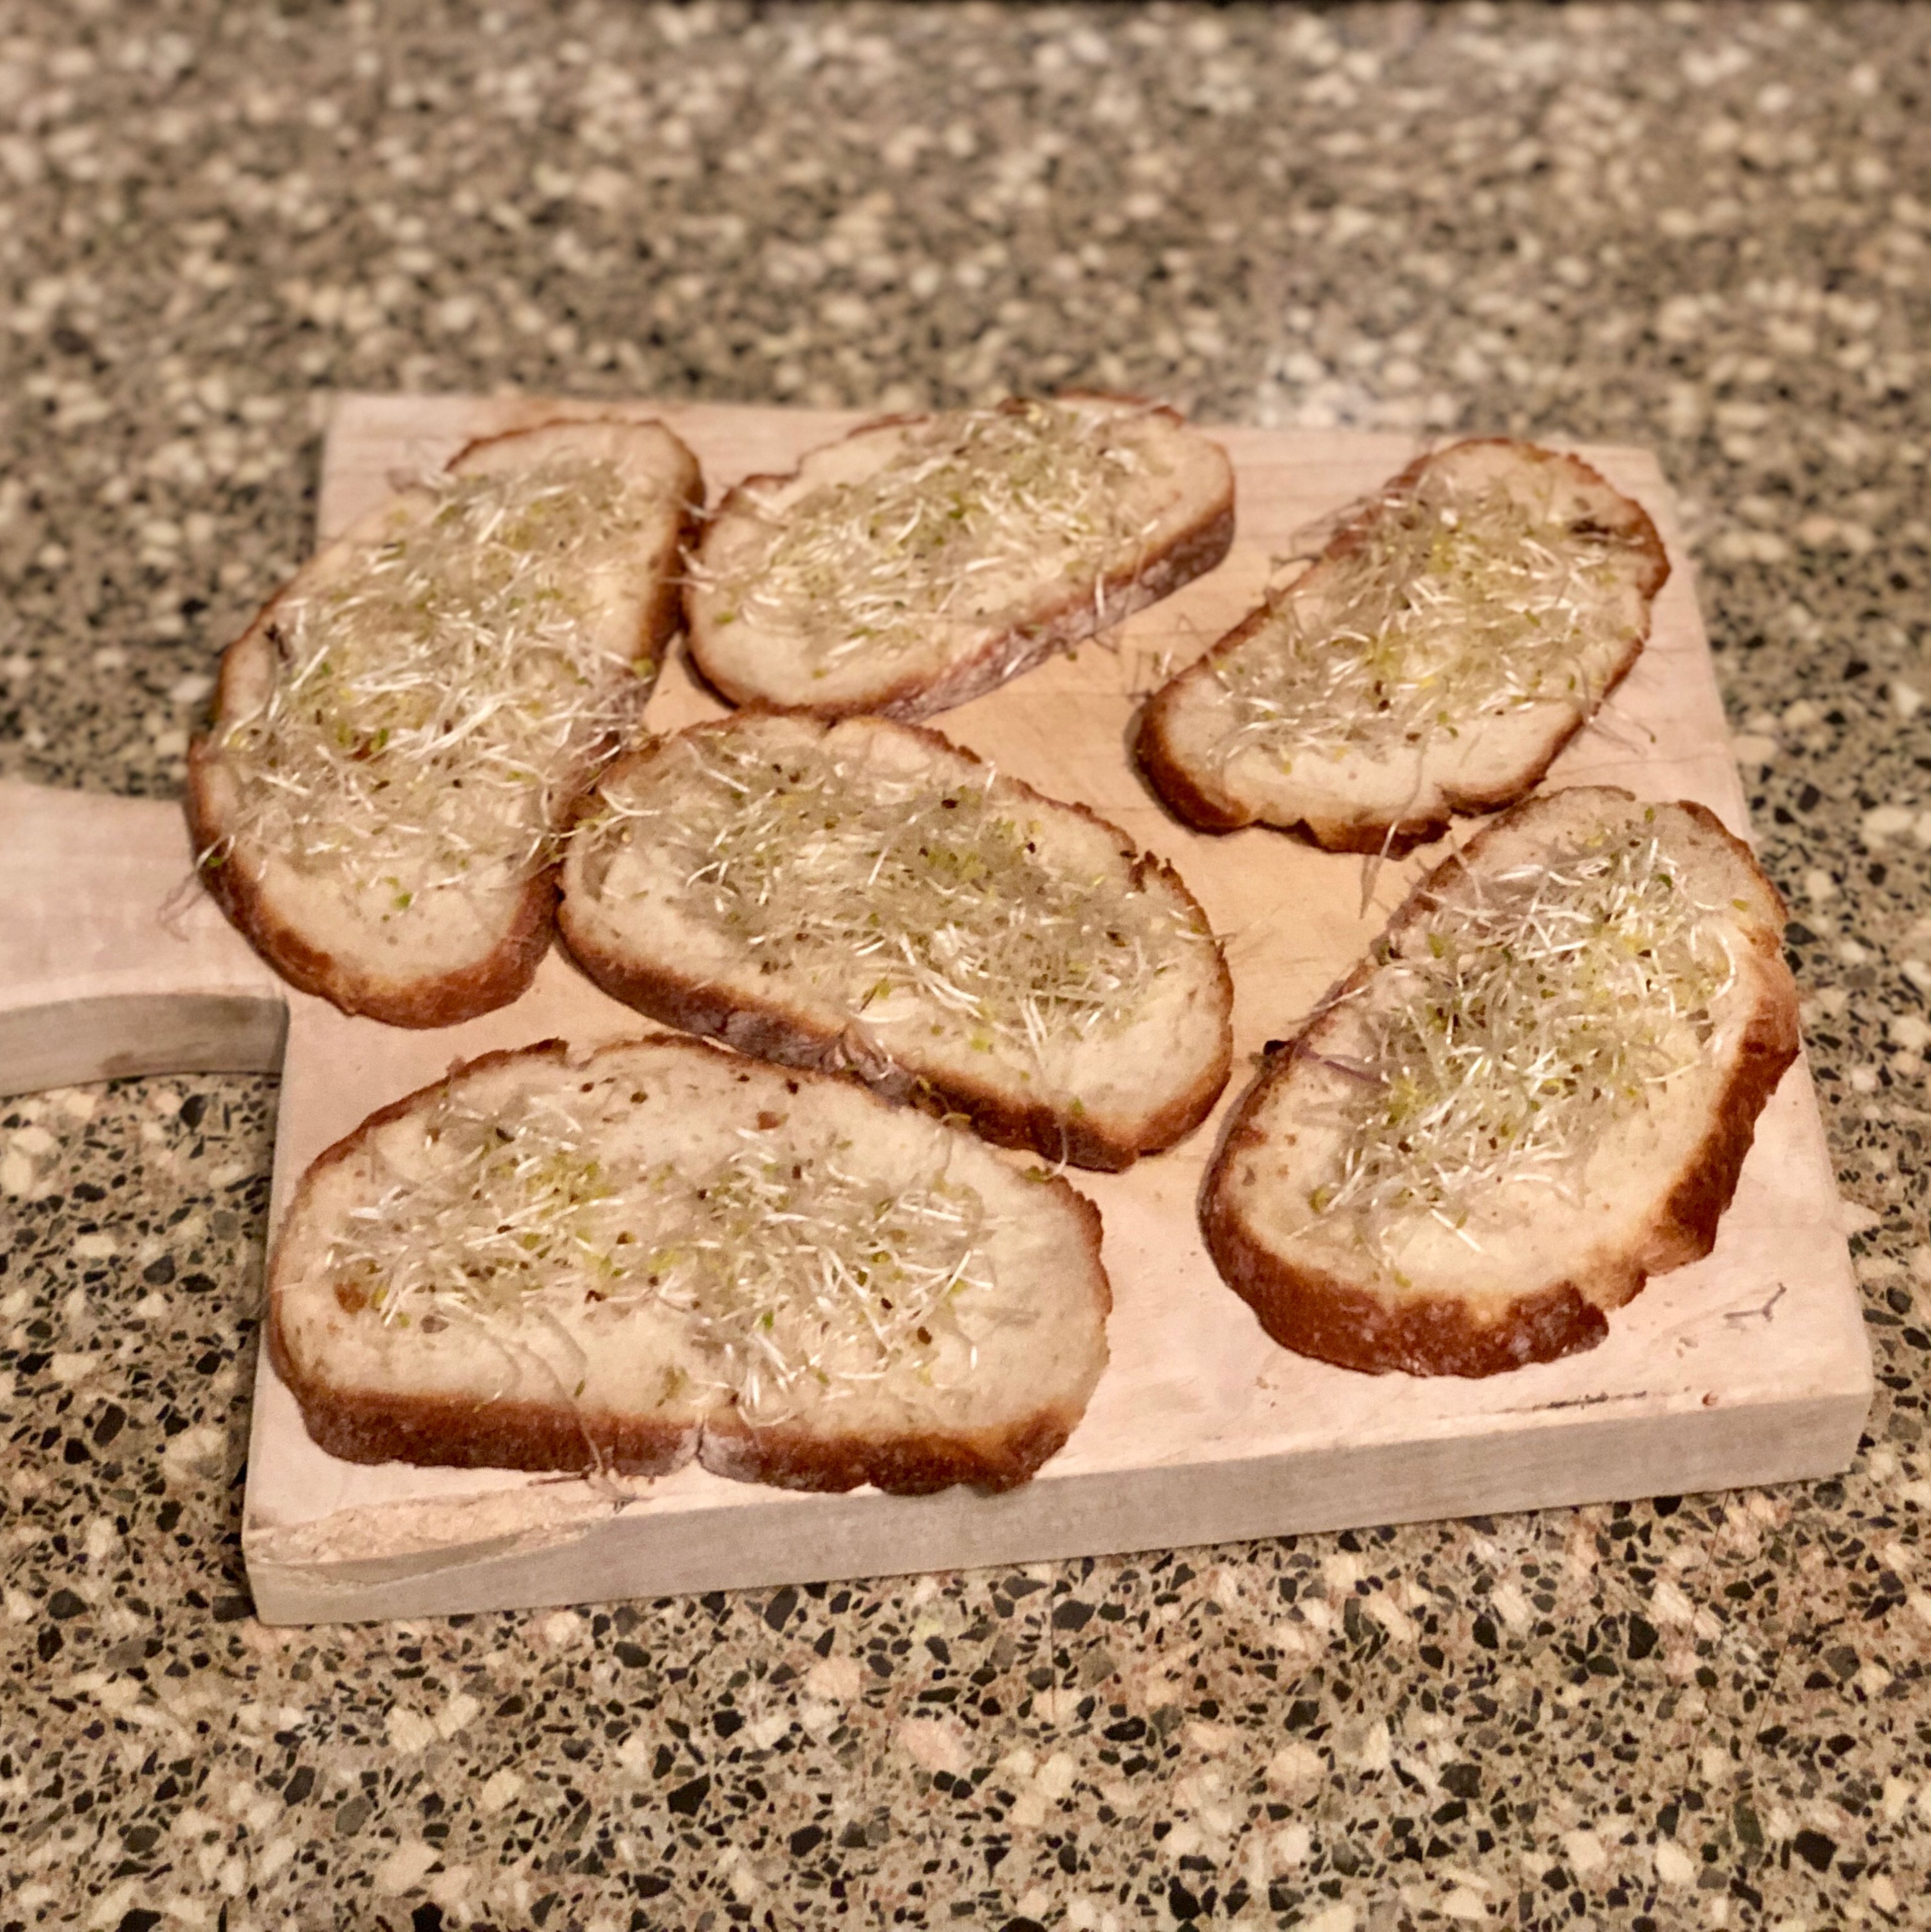 Sprinkle broccoli sprouts on bread slices. 